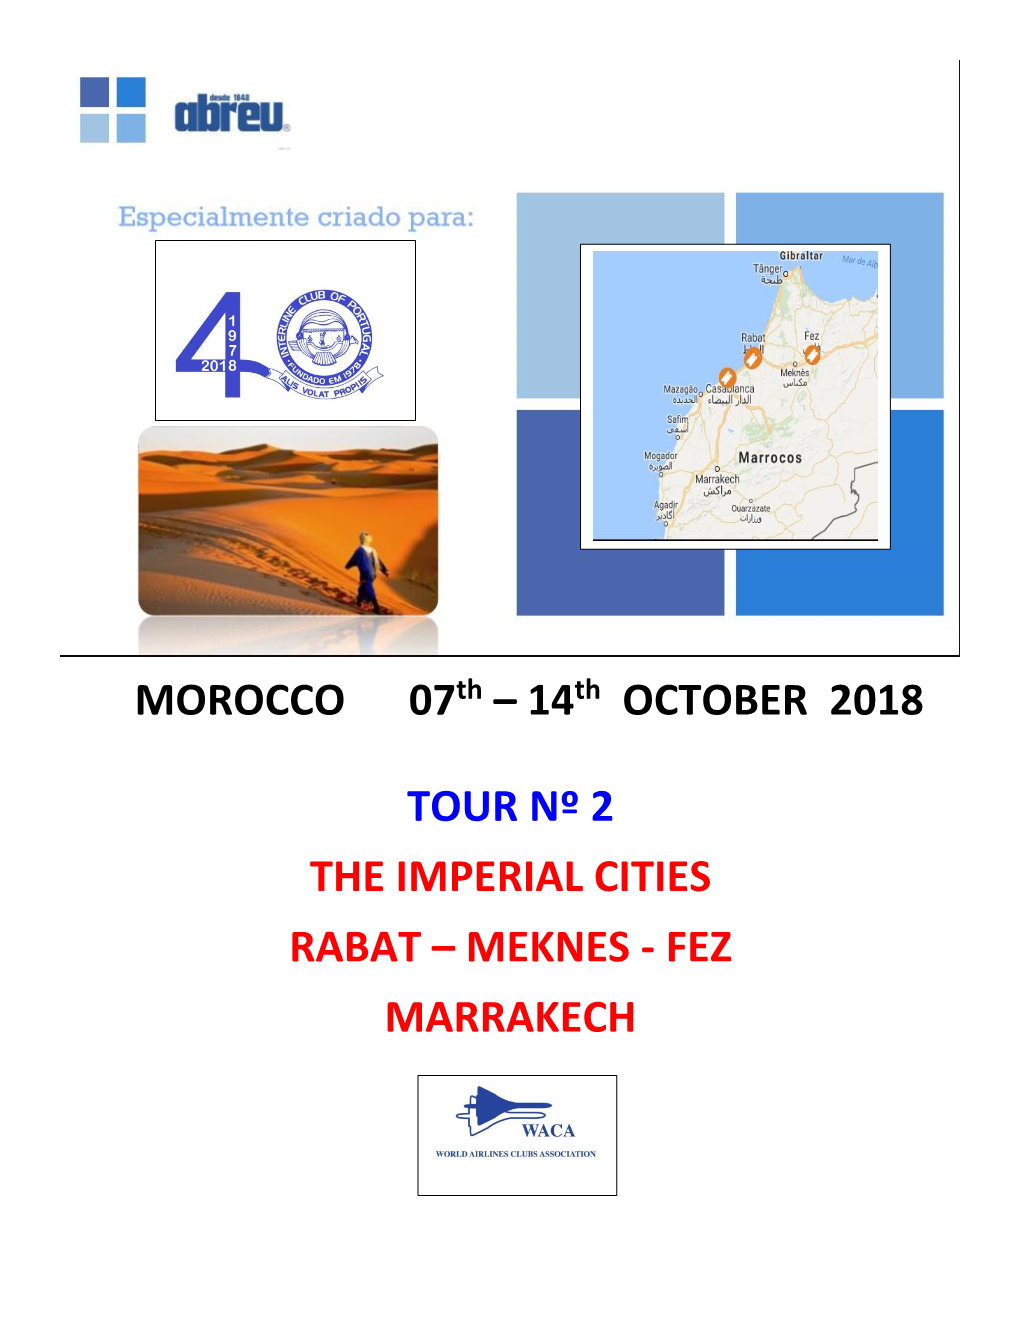 MOROCCO 07Th – 14Th OCTOBER 2018 TOUR Nº 2 the IMPERIAL CITIES RABAT – MEKNES